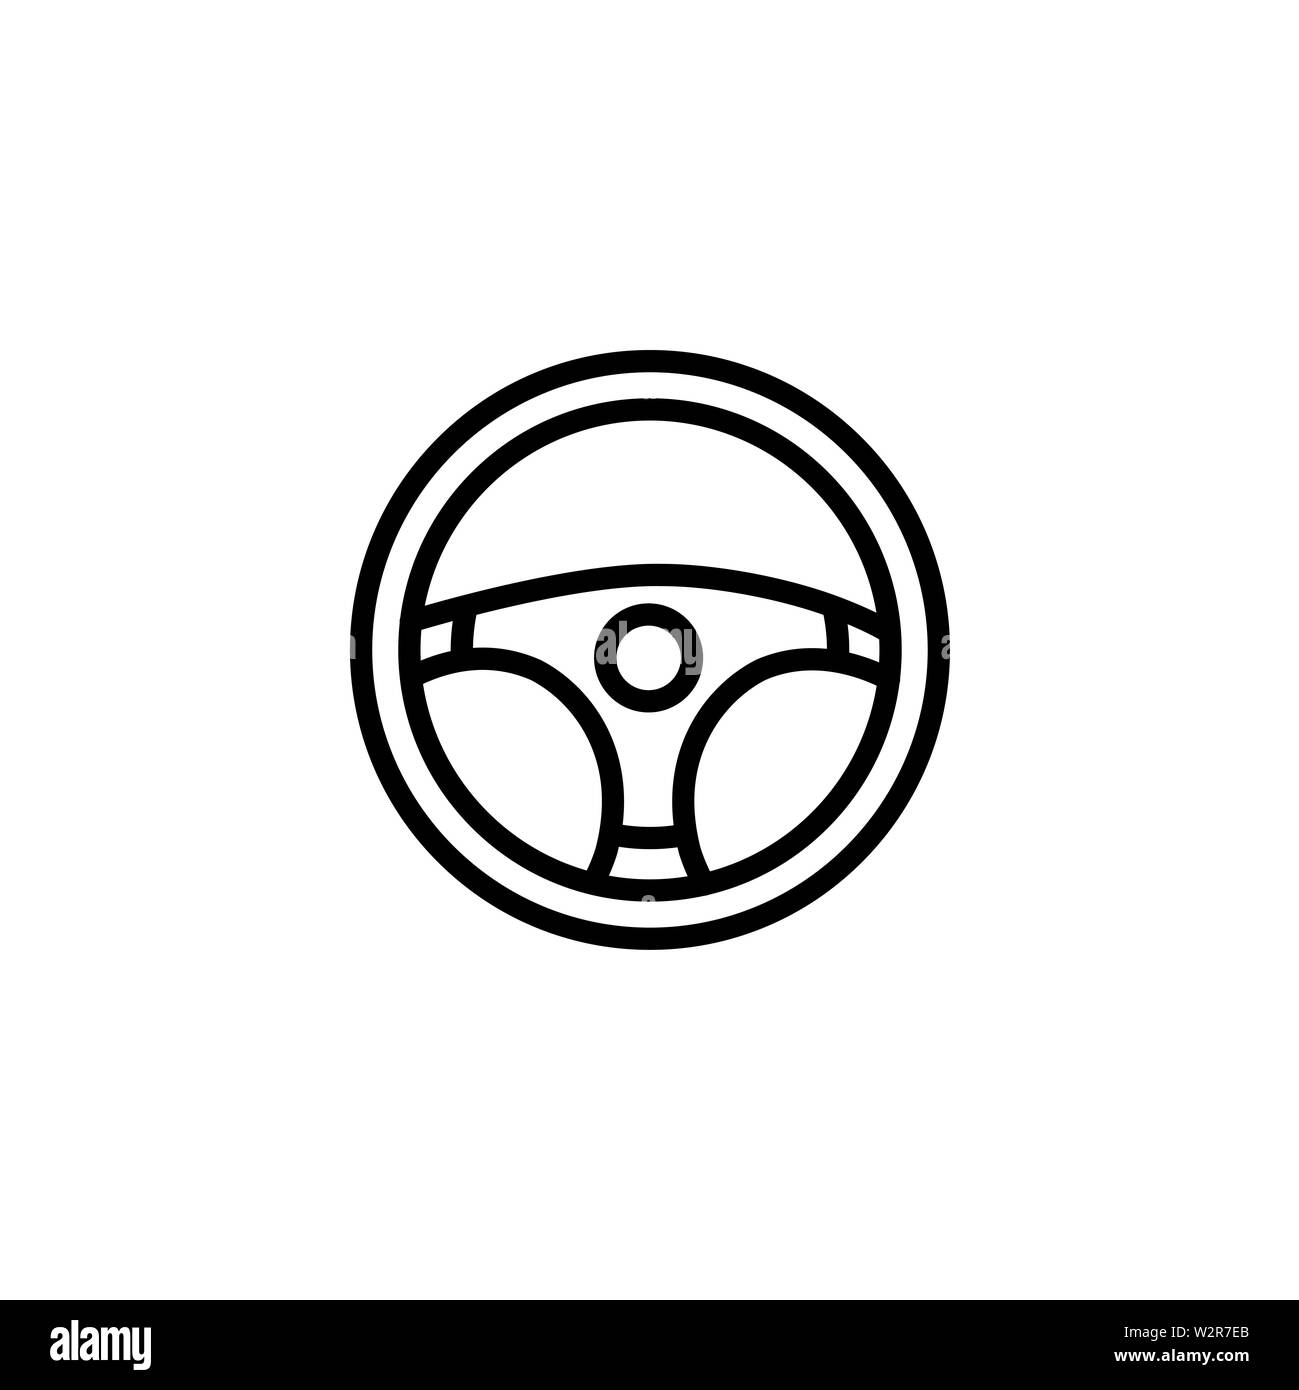 Steering wheel icon in cartoon Black and White Stock Photos & Images - Alamy